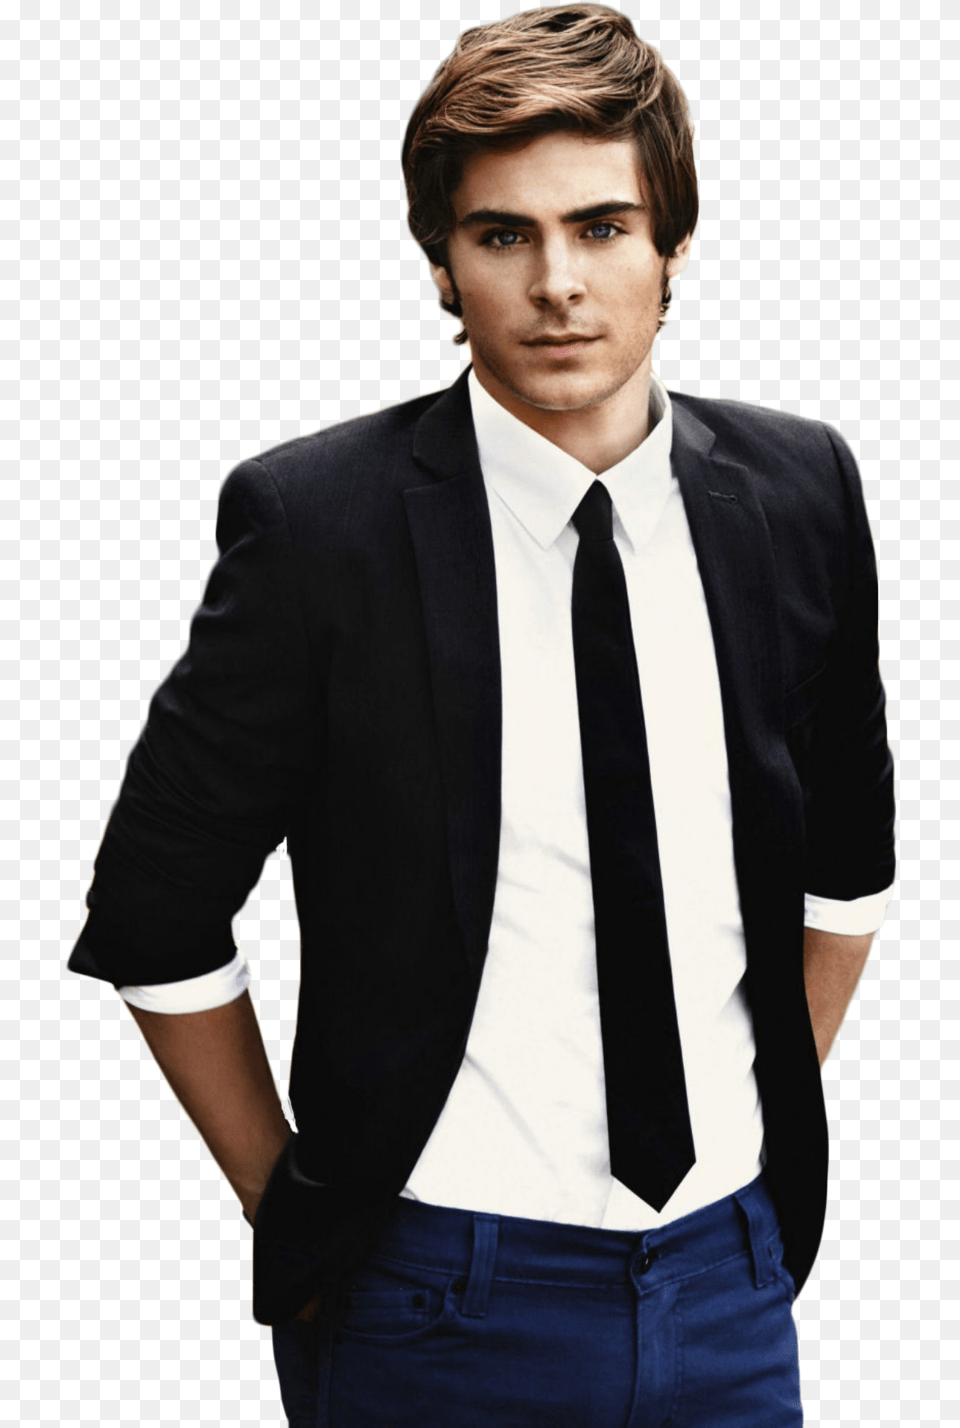 Download Zac Efron Pose Like A Model Boy Full Size Zac Efron Model, Accessories, Tie, Suit, Shirt Png Image